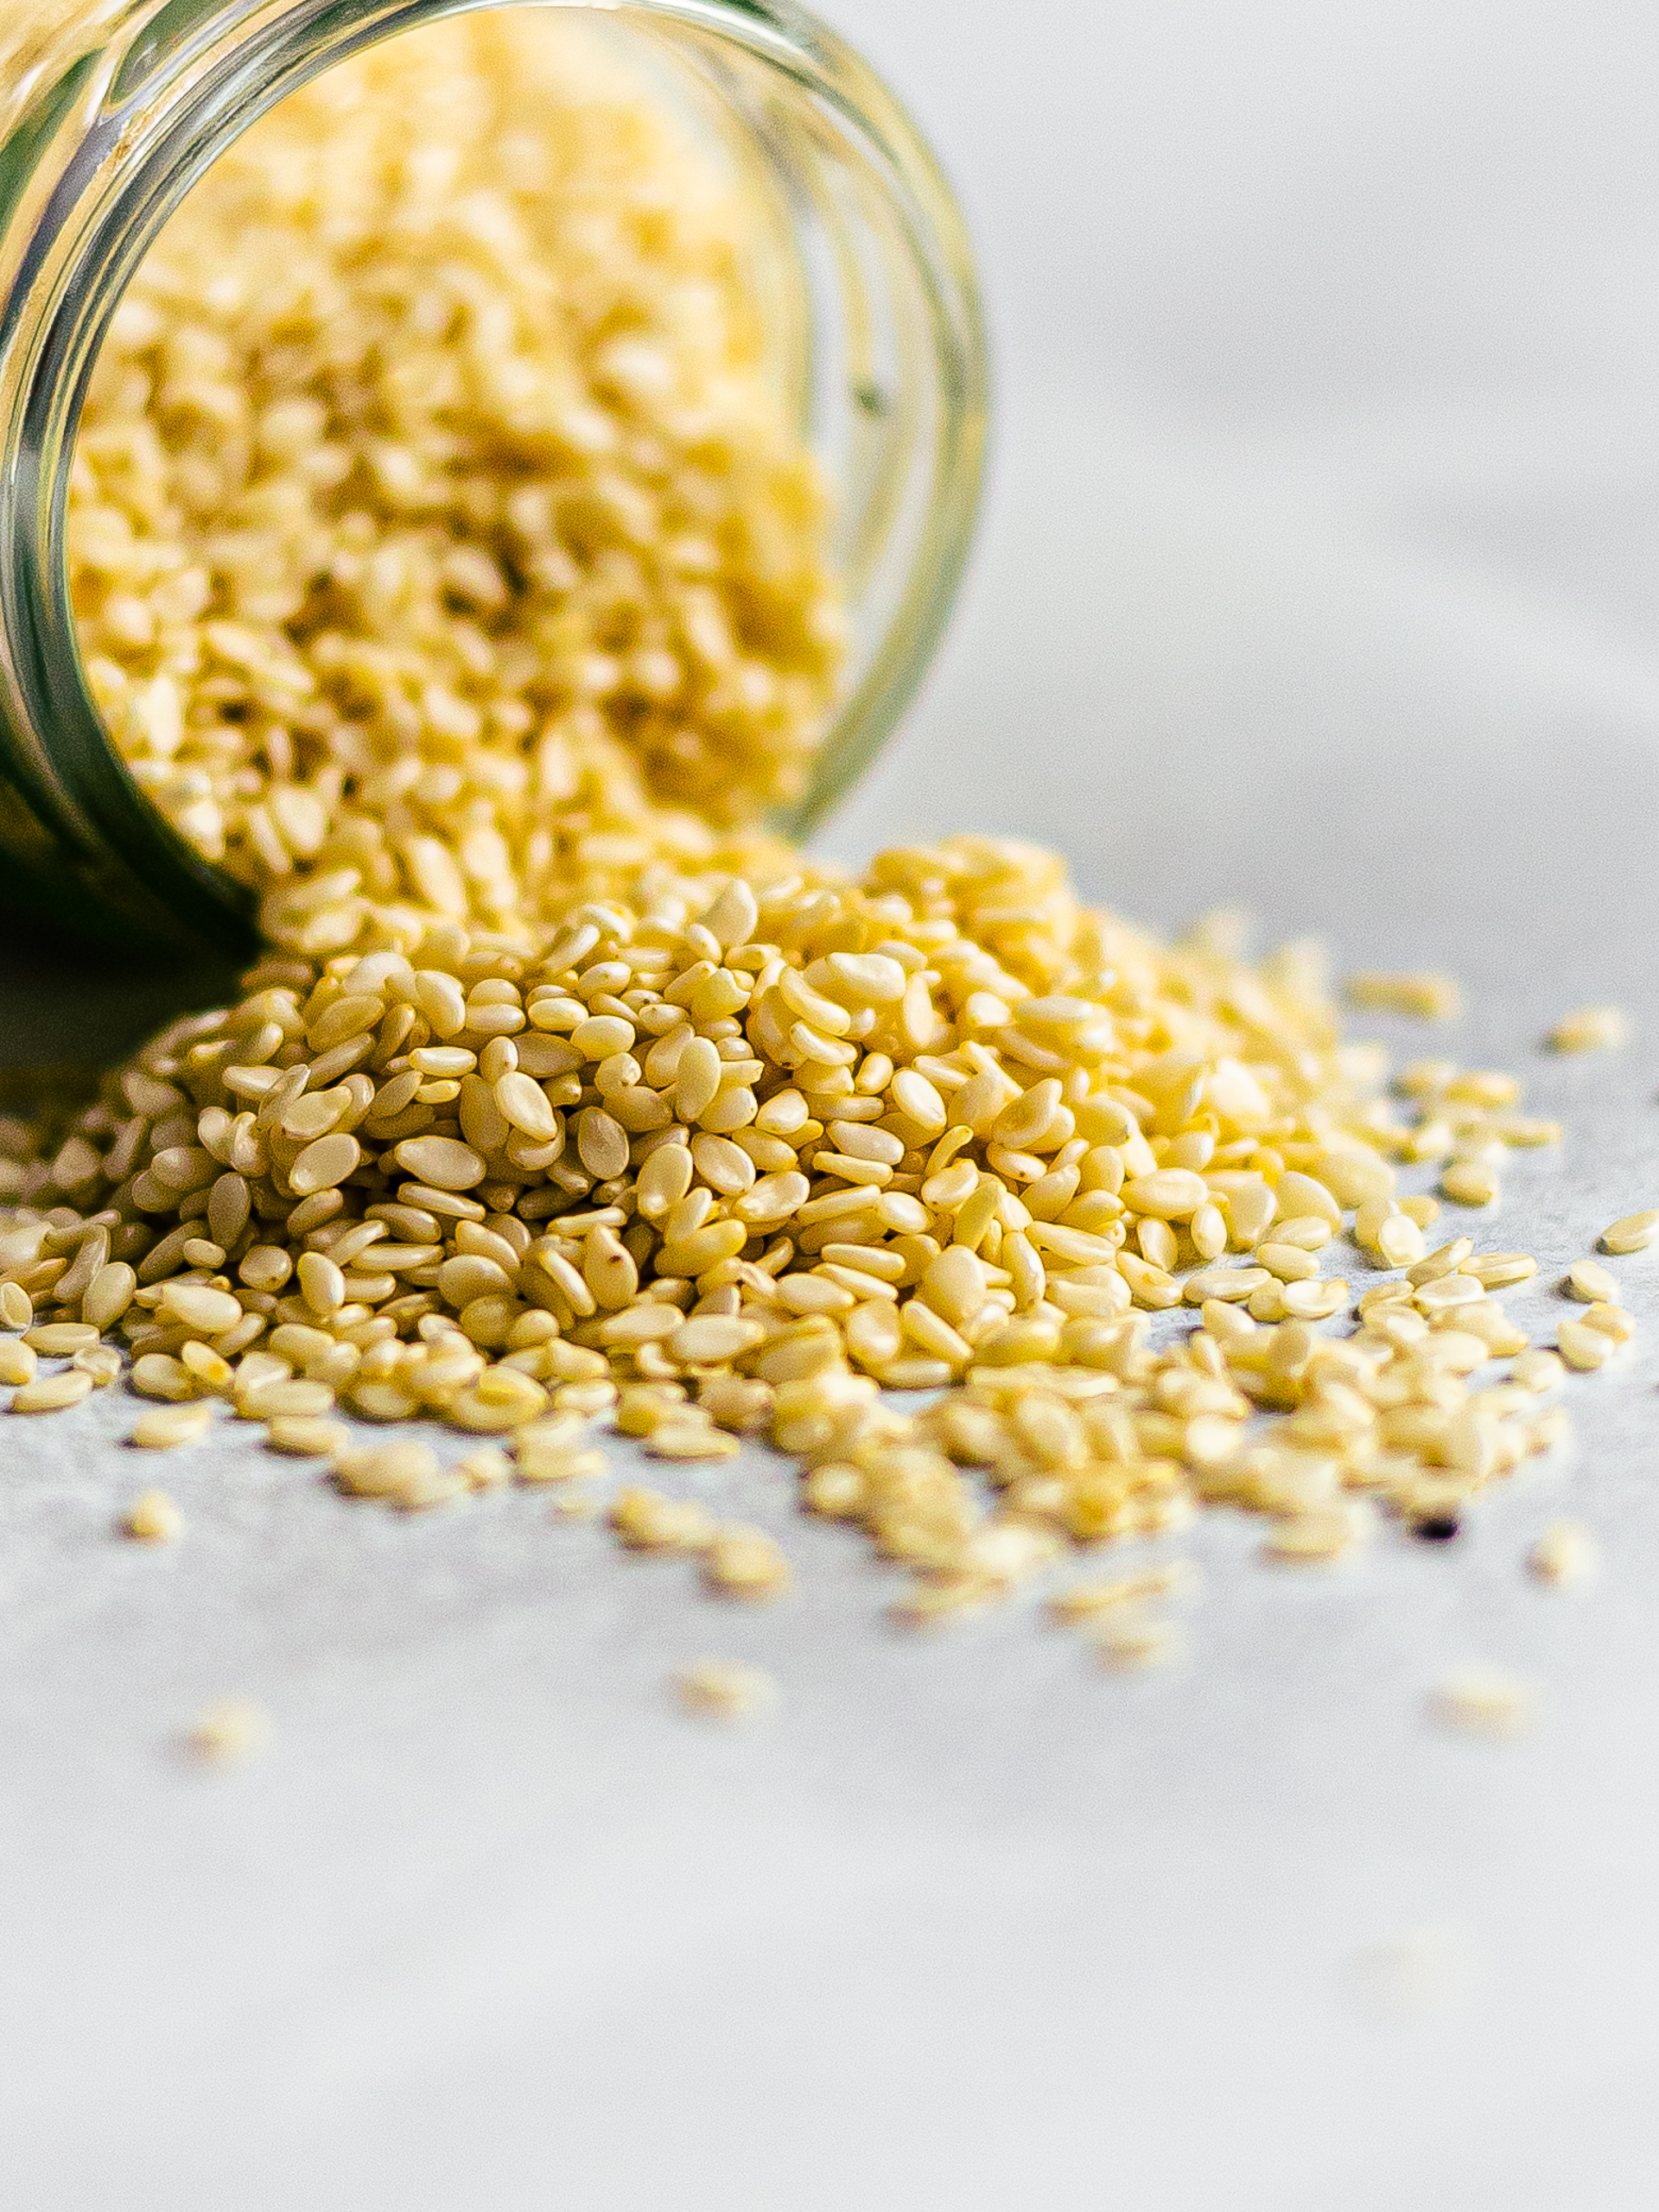 3 Super Seeds You Should Include in Your Diet